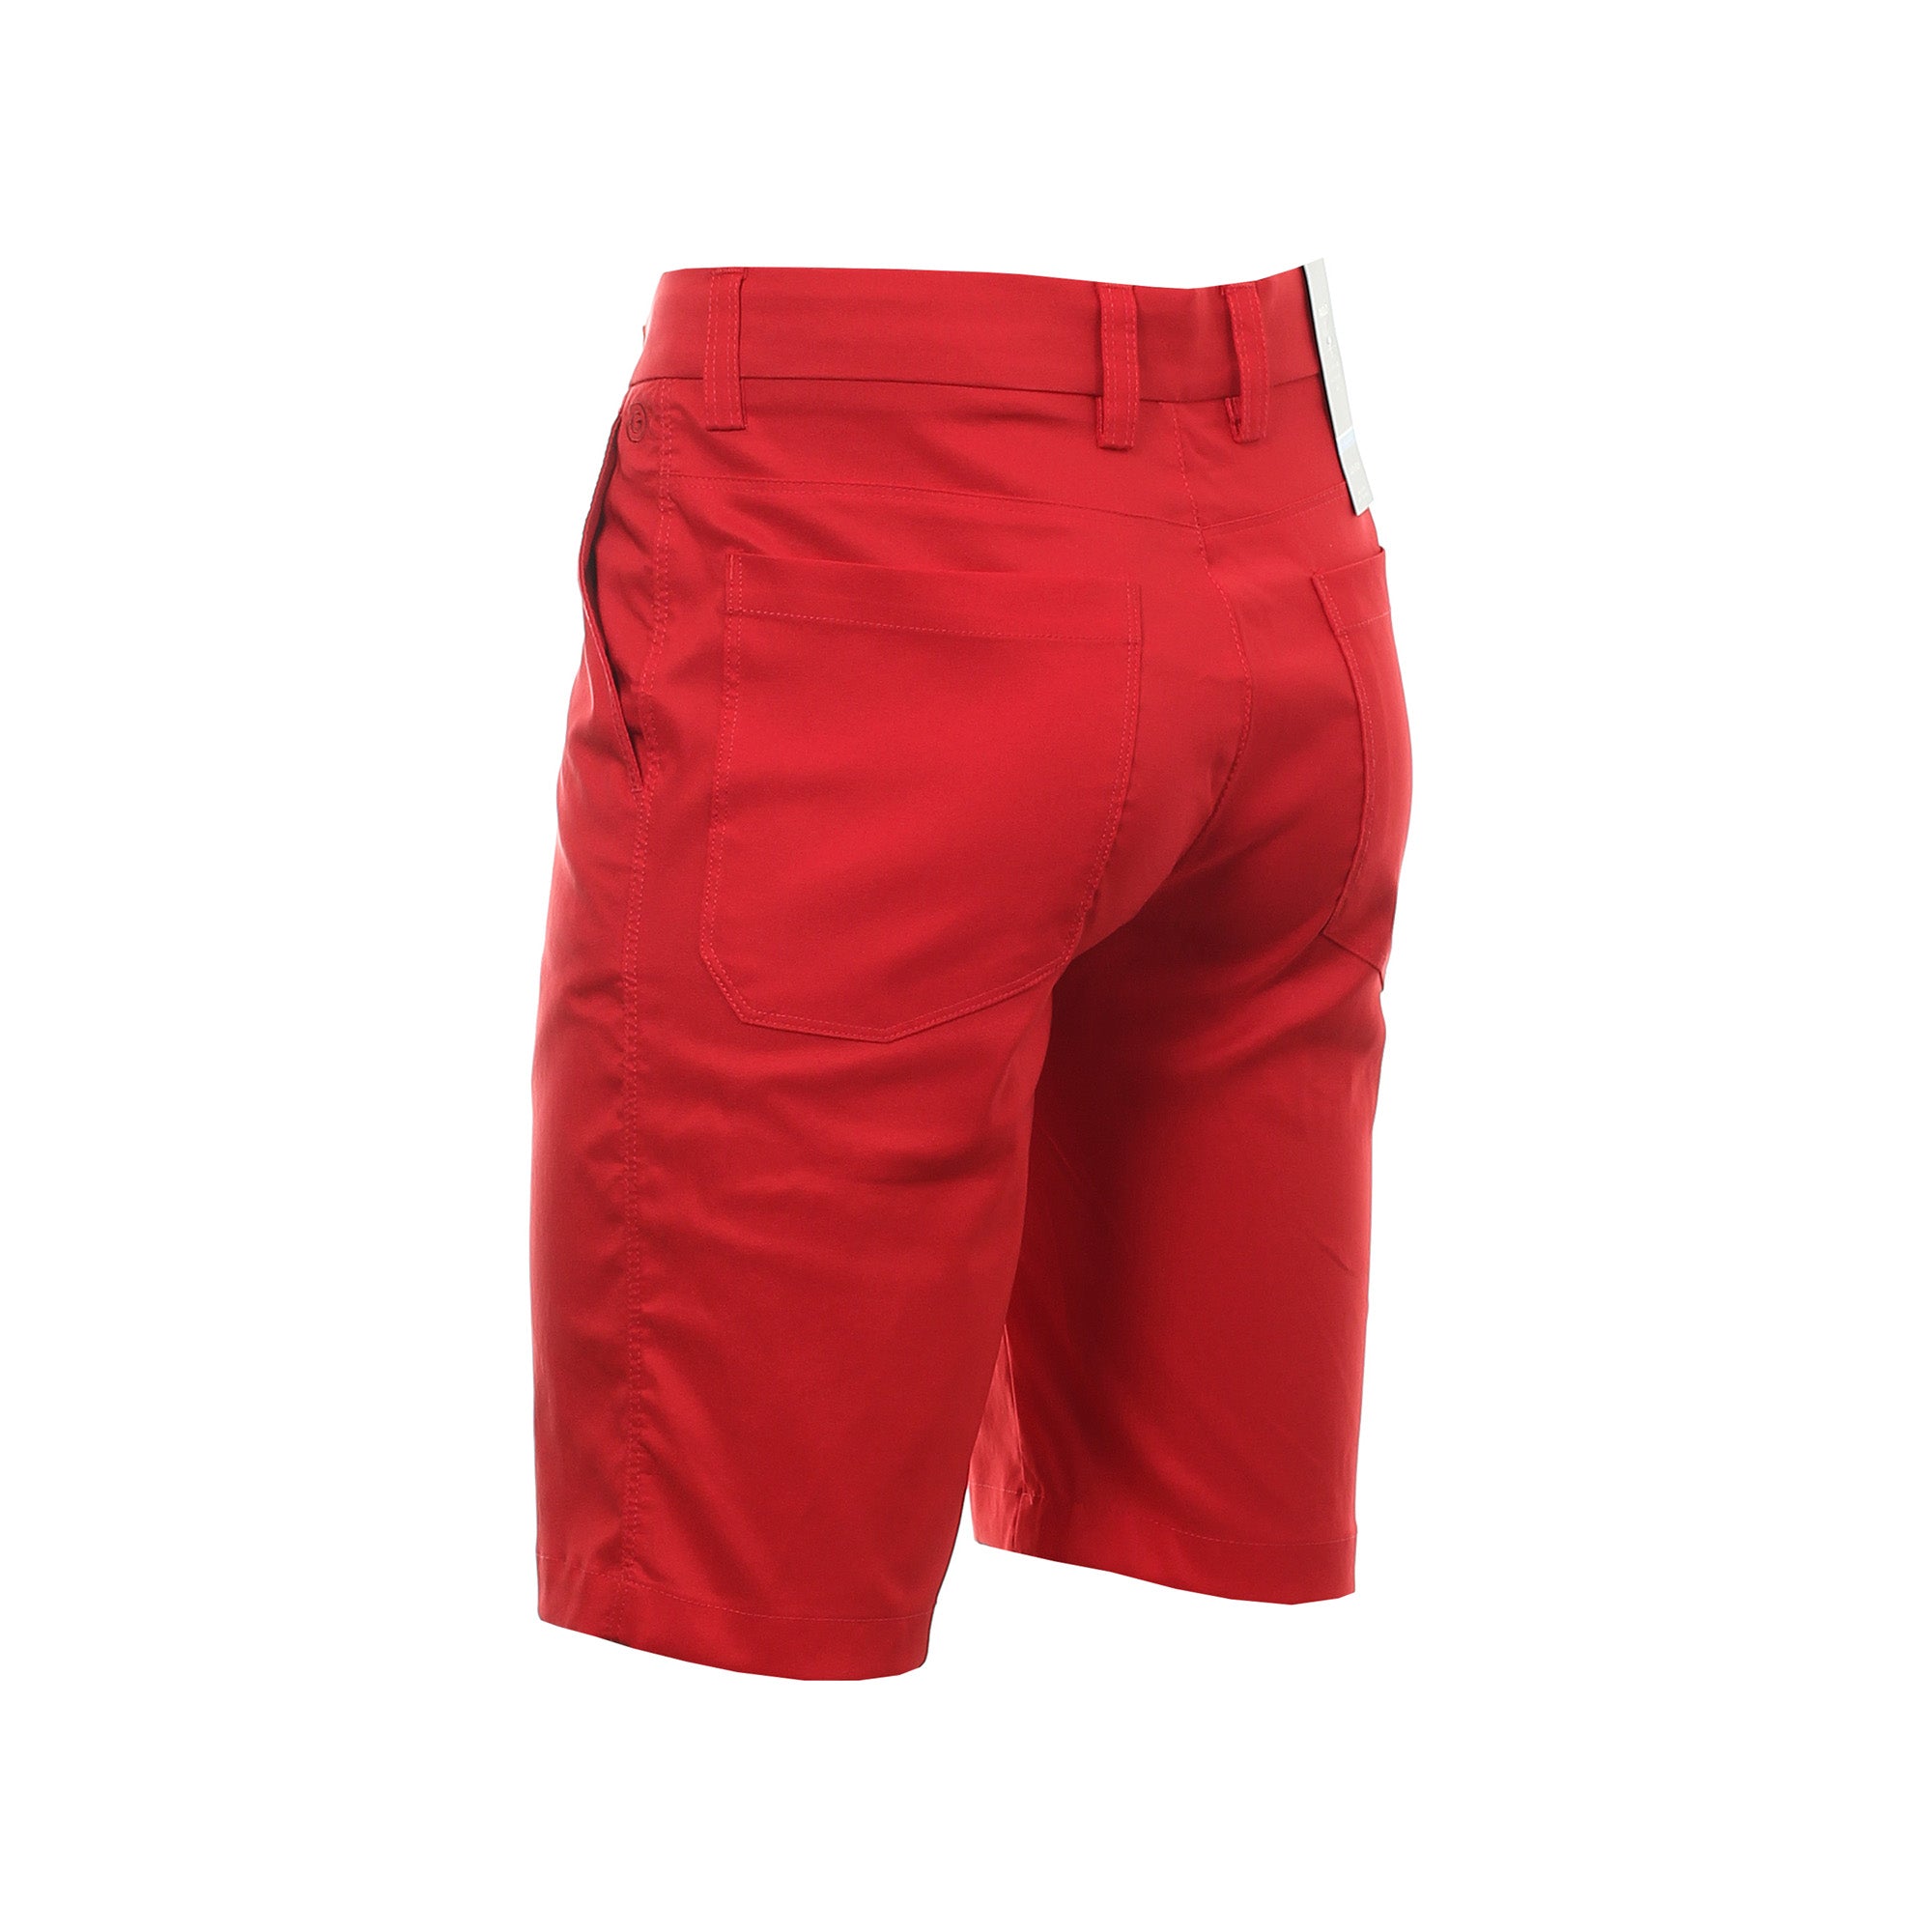 galvin-green-paolo-ventil8-golf-shorts-red